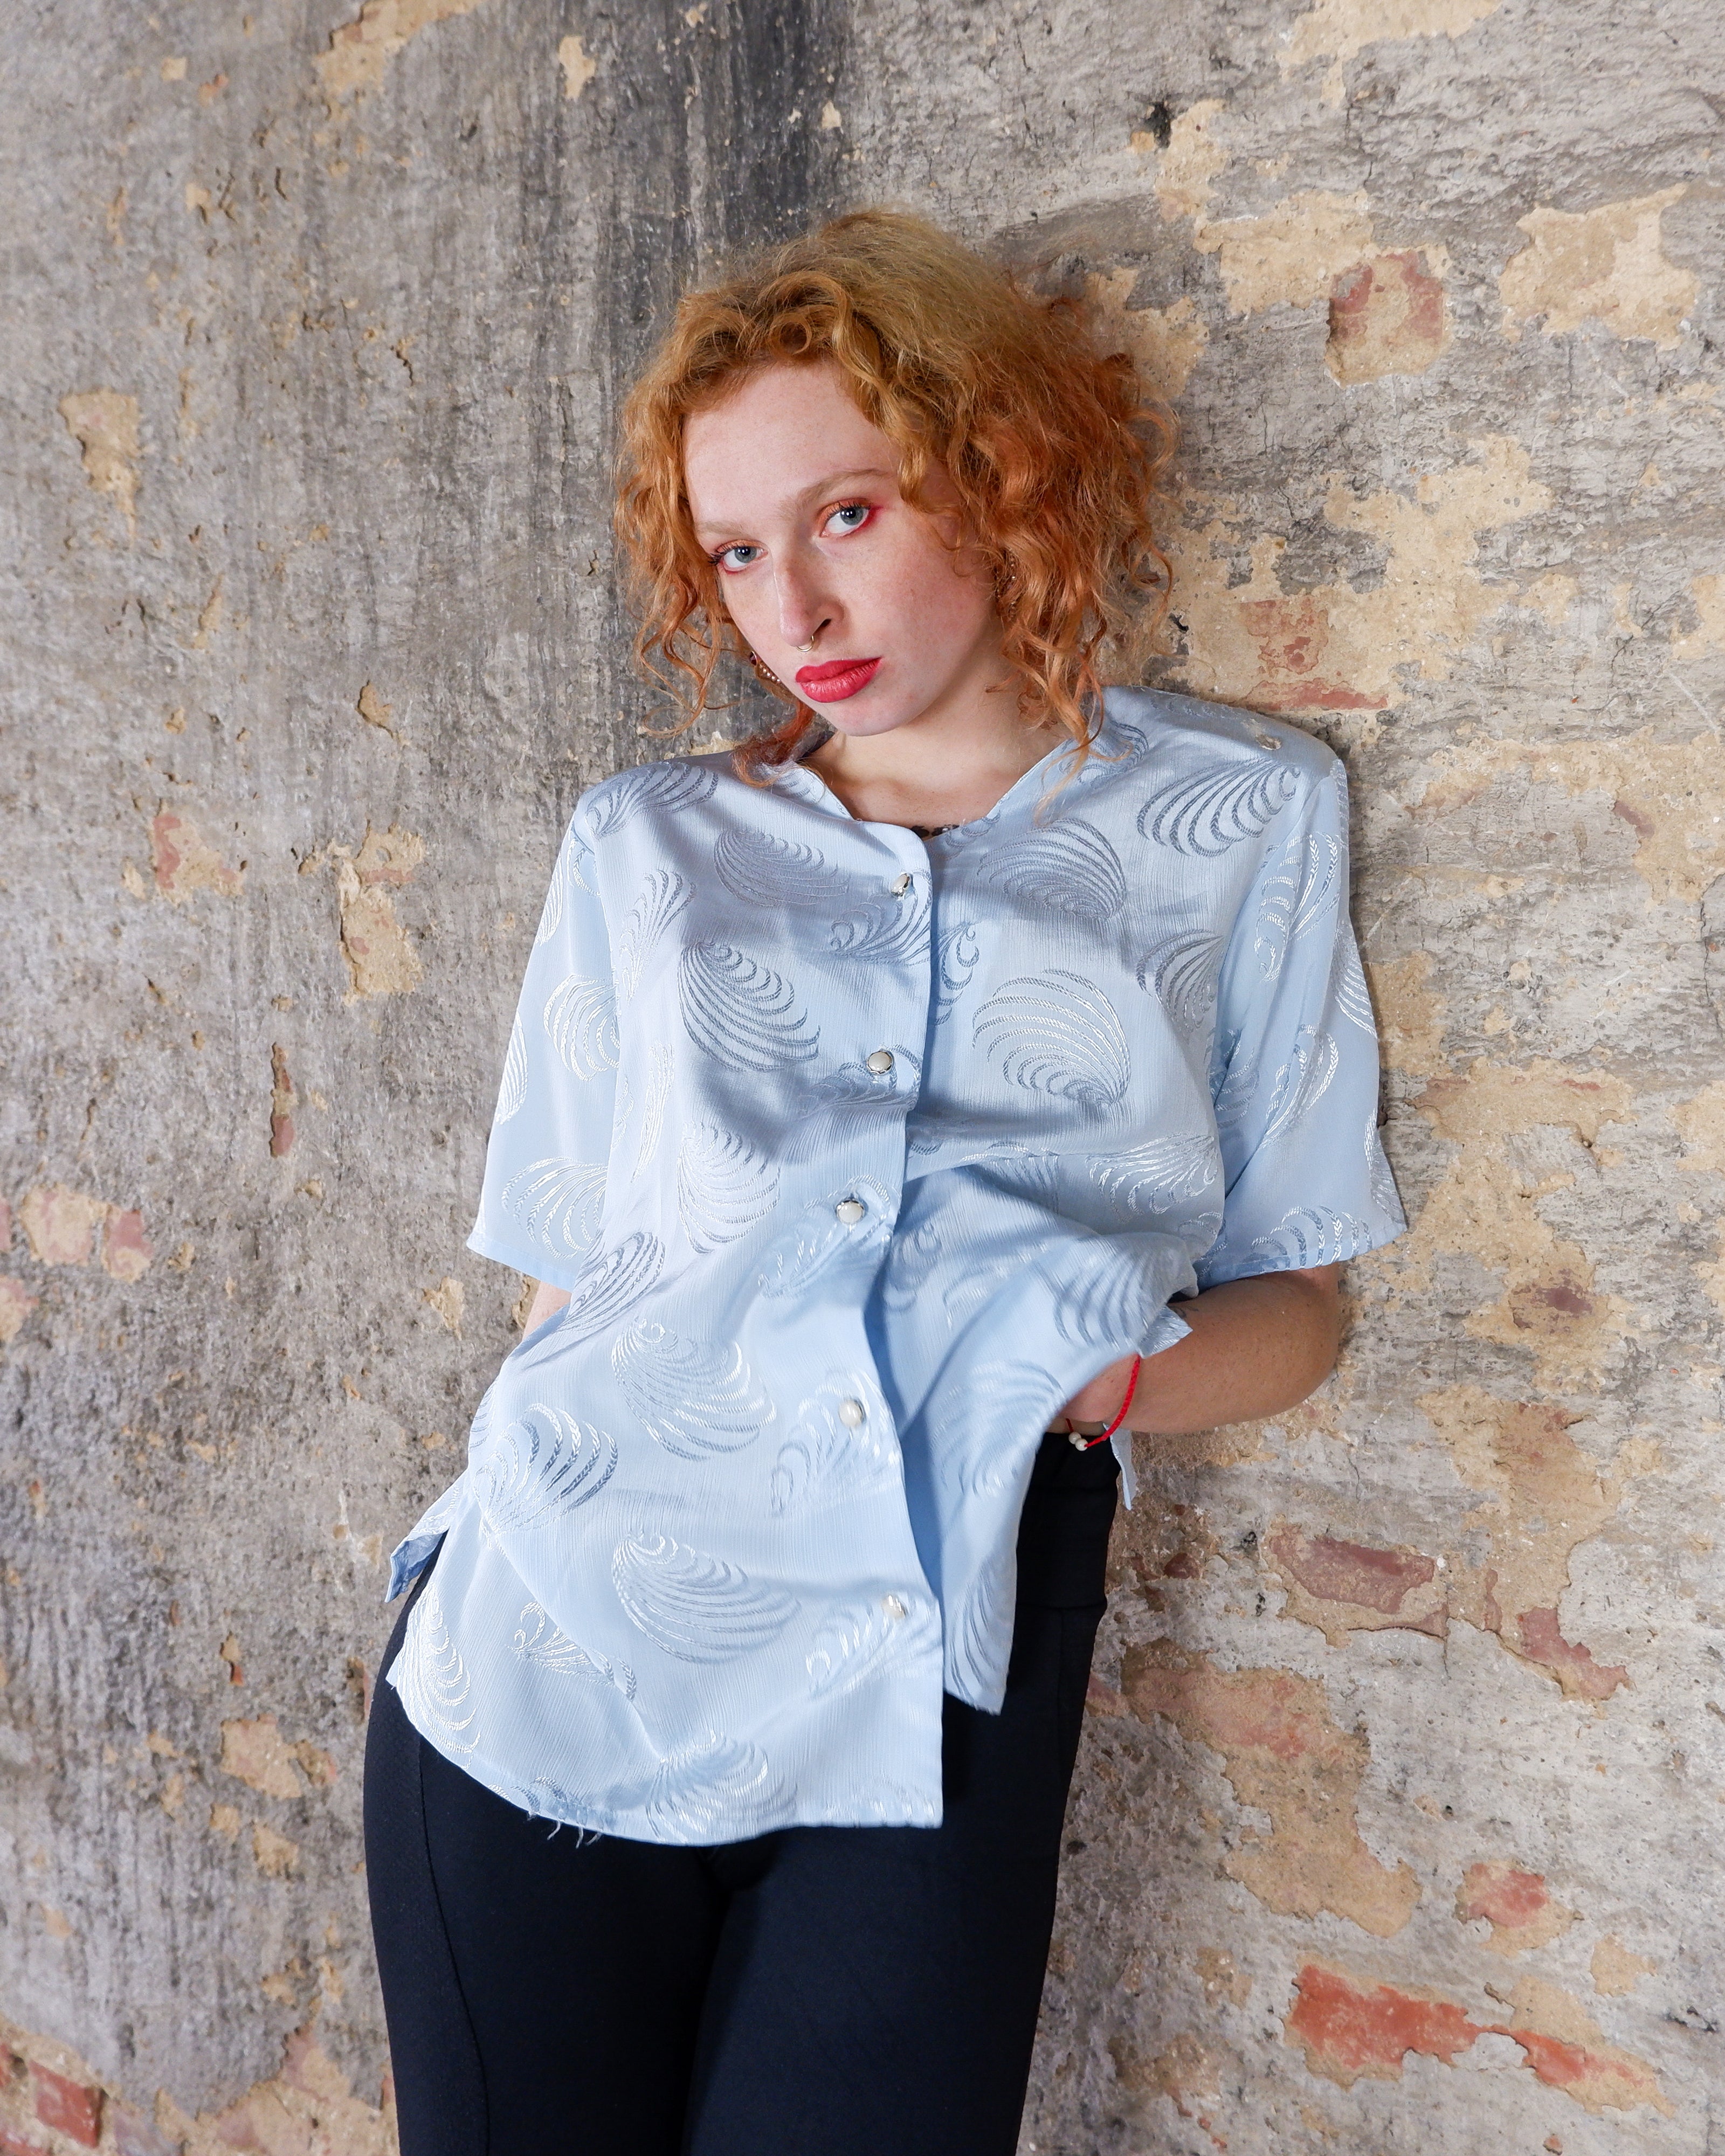 Introduce some sparkle to your style with this vintage 80s light blue blouse. The flattering fit, courtesy of the short sleeves and shoulder pads, meets a playful touch of shimmering pattern. Sparkle on!